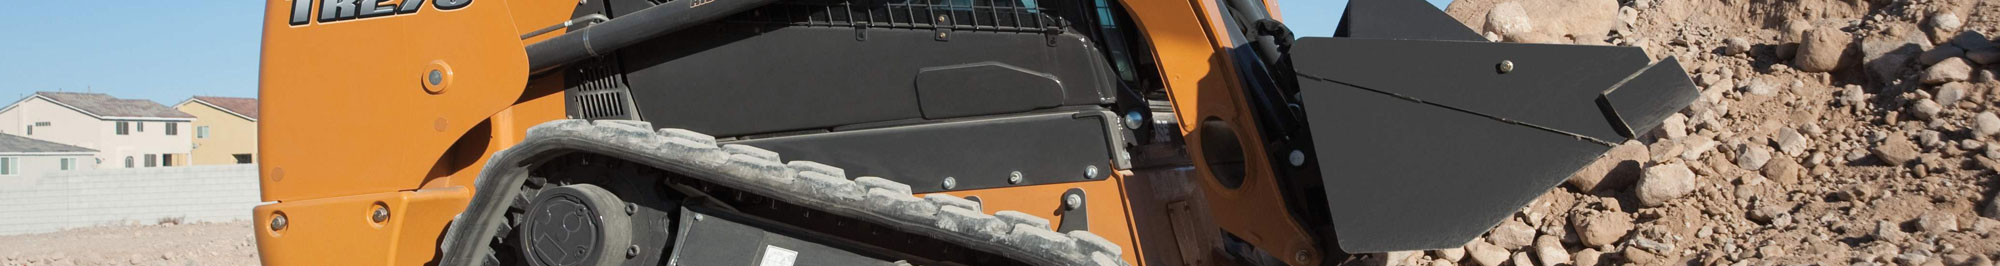 Case Skid Steer Undercarriages